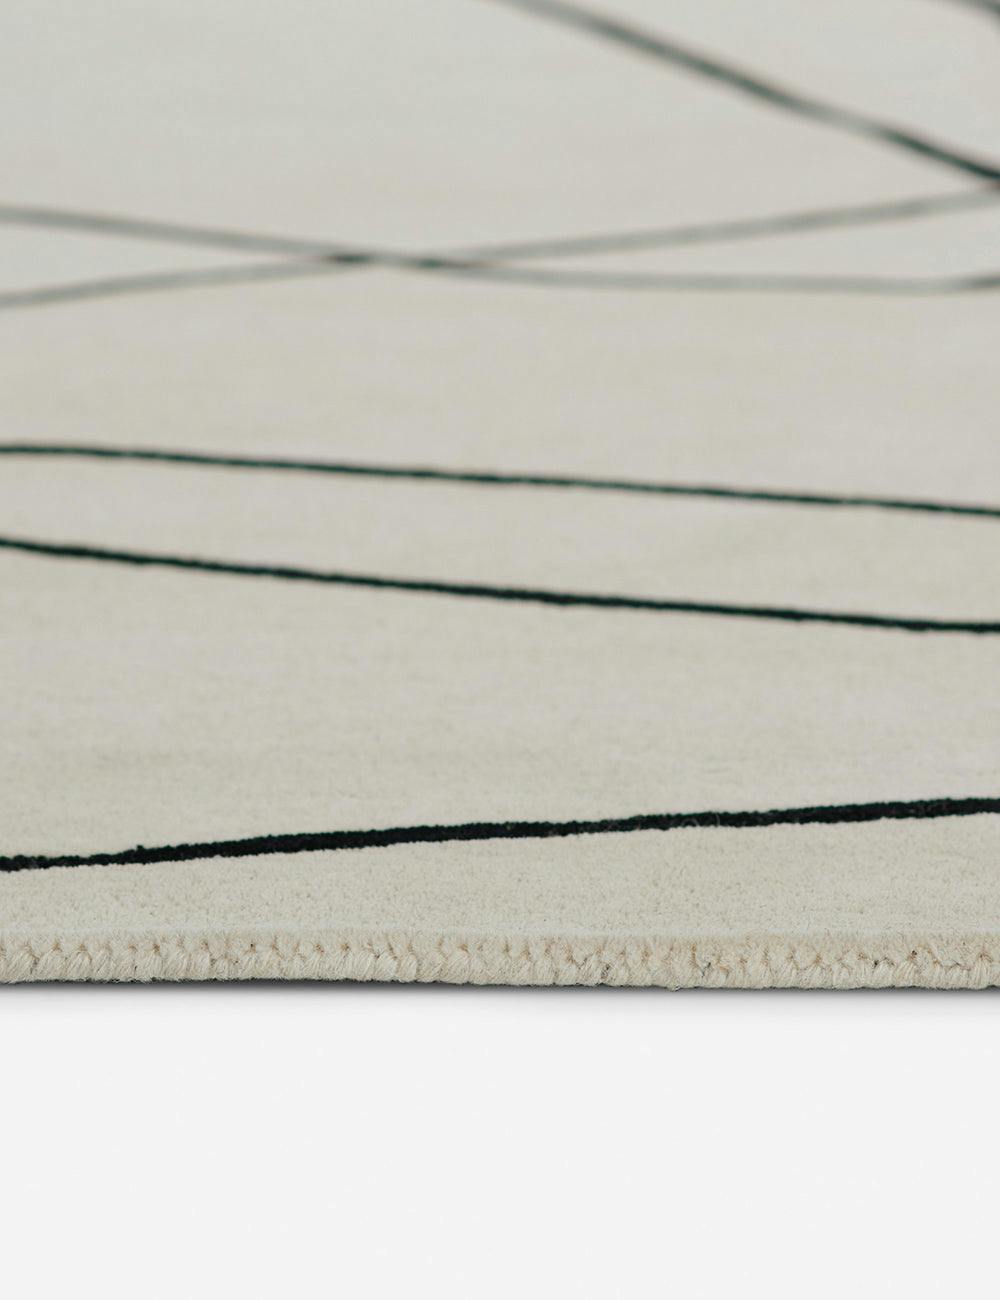 Shayla 2'x3' White Hand Tufted Wool Area Rug